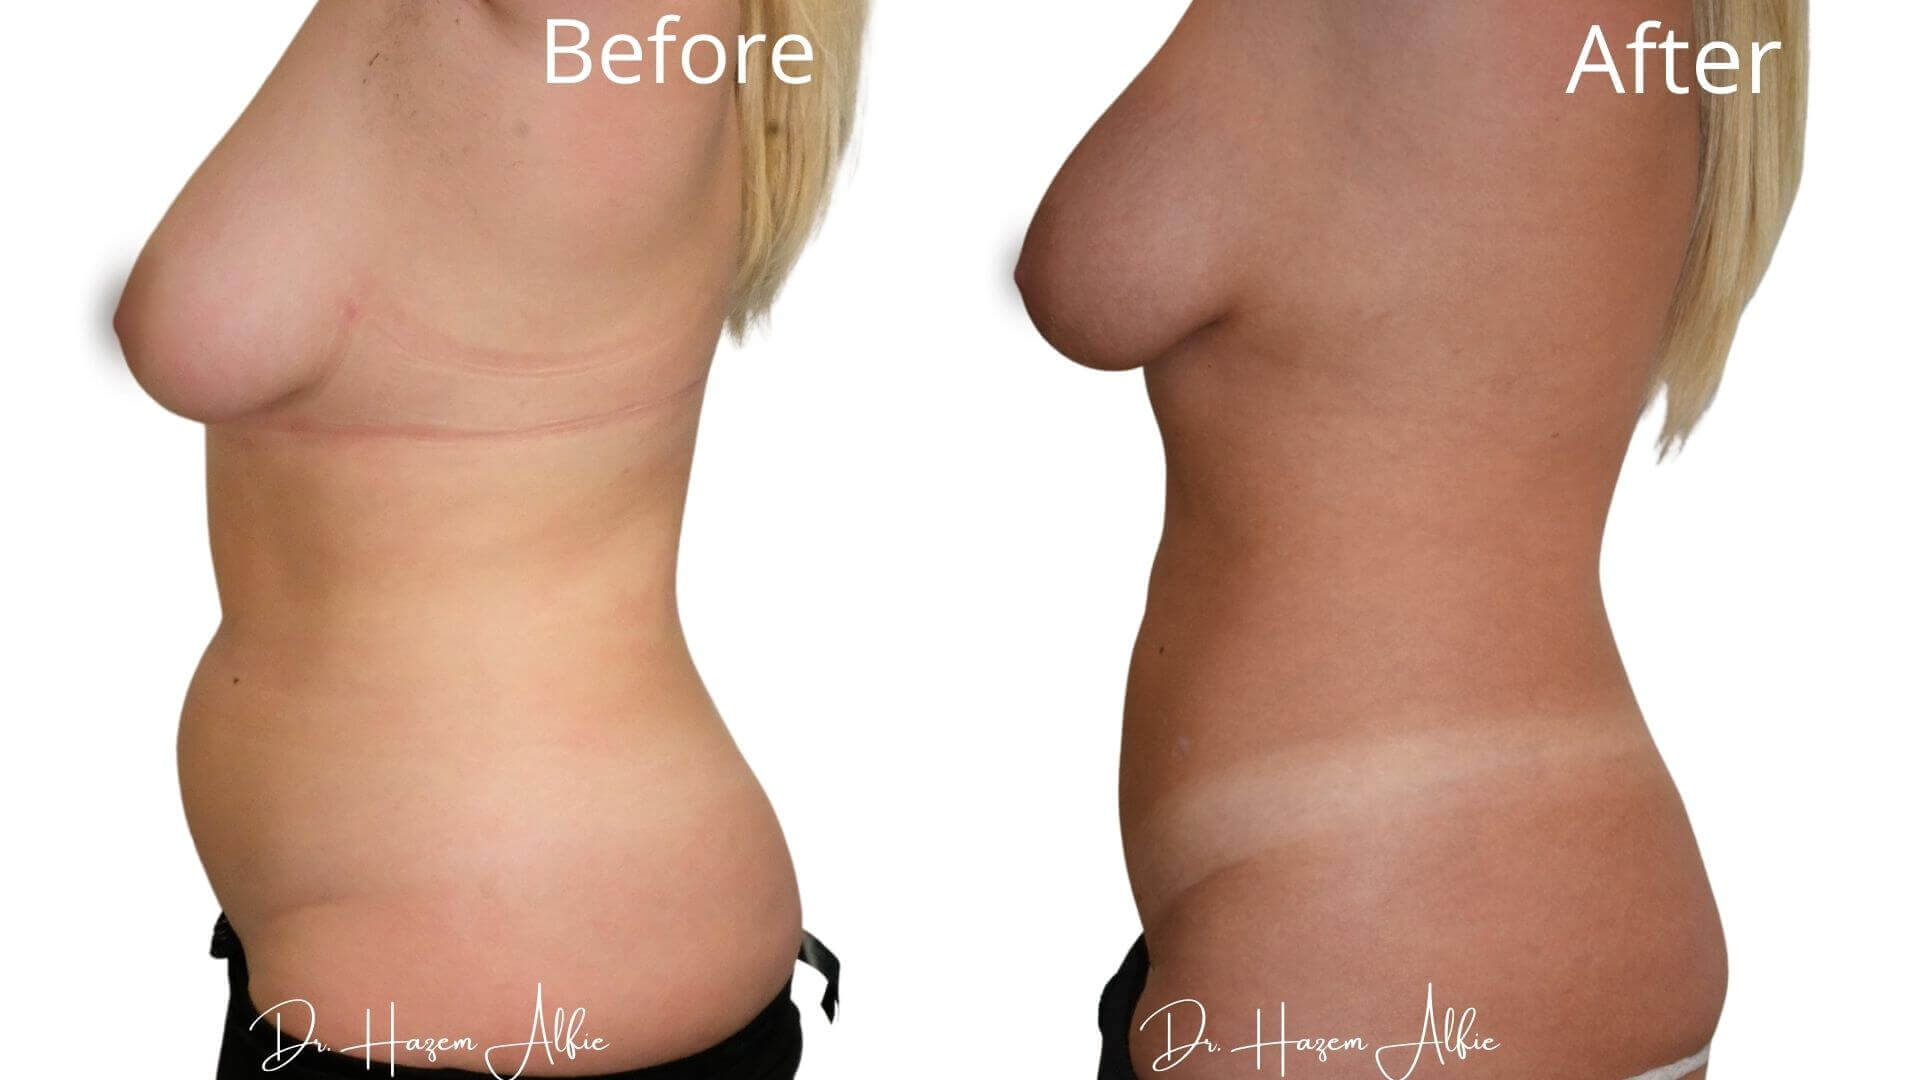 A before and after picture of the back of a woman 's body.